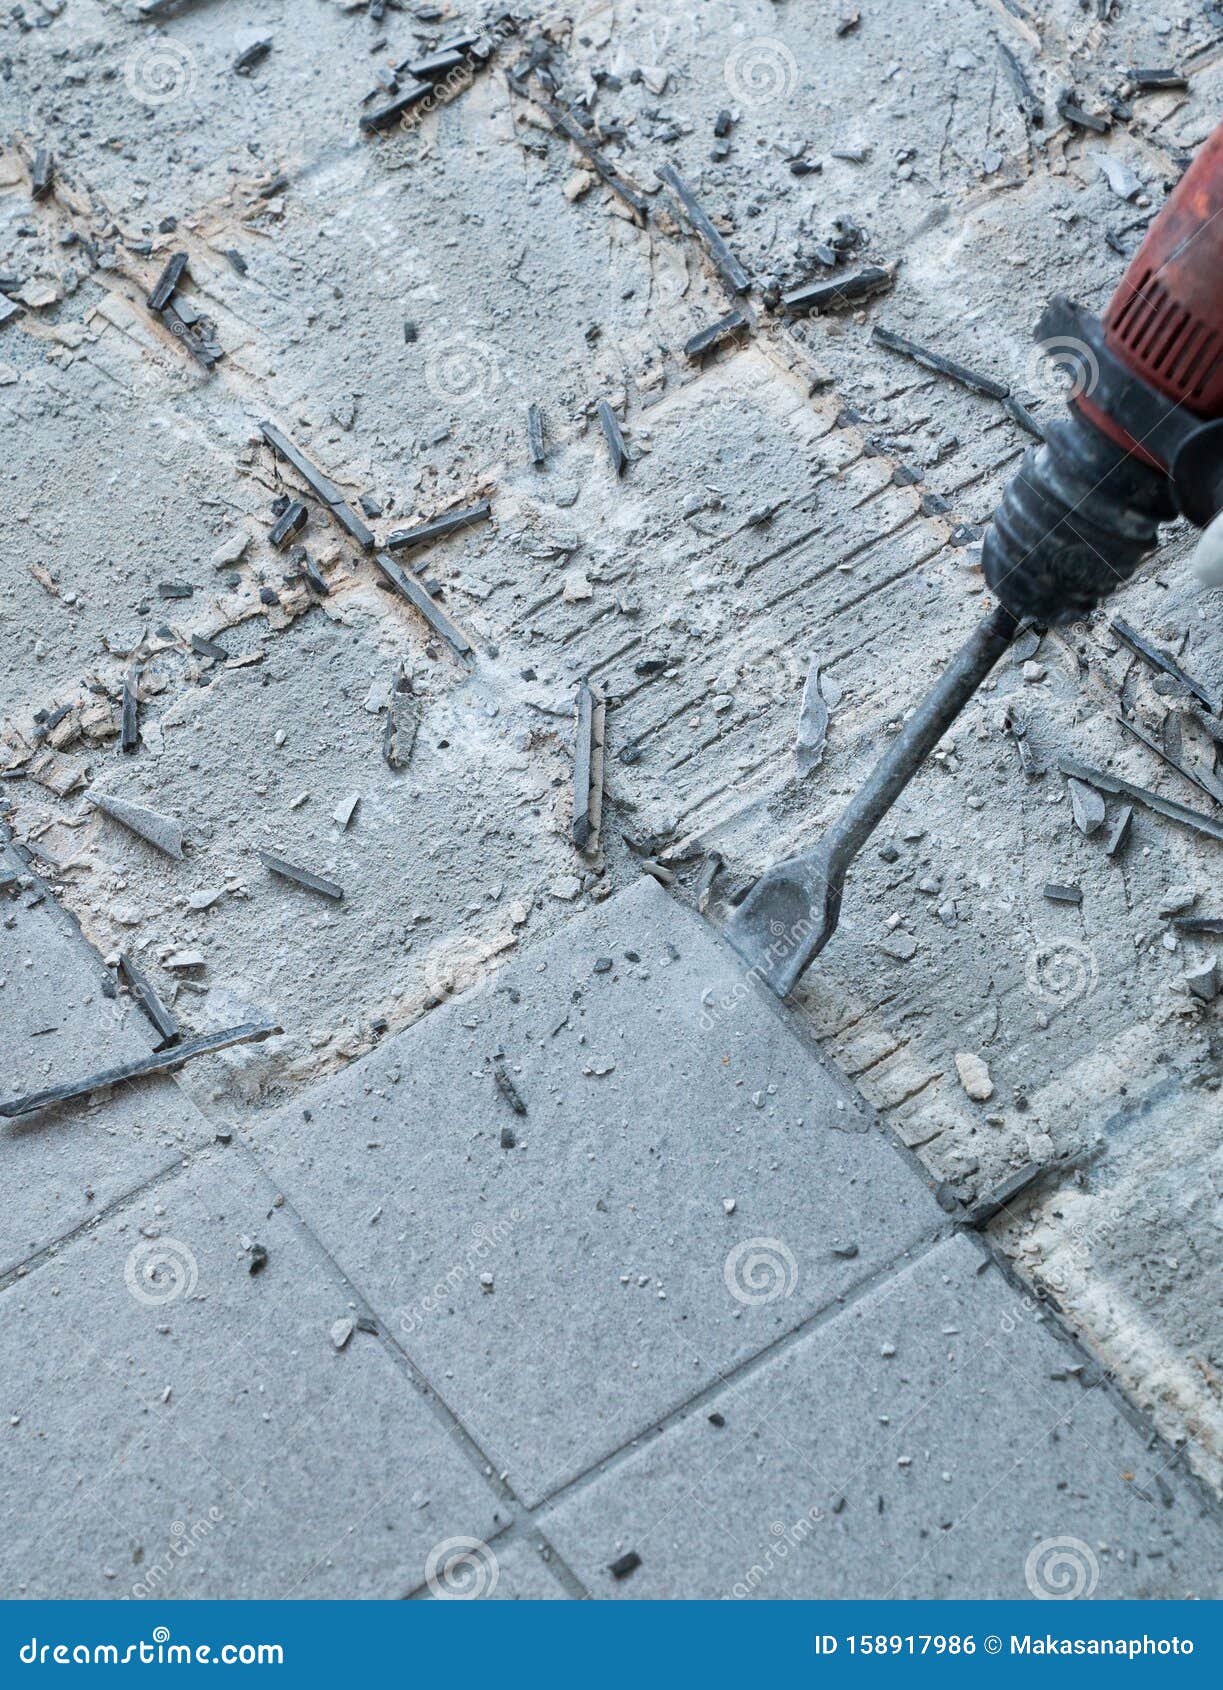 construction worker using a handheld demolition hammer and wall breaker to chip away and remove old floor tiles during renovation